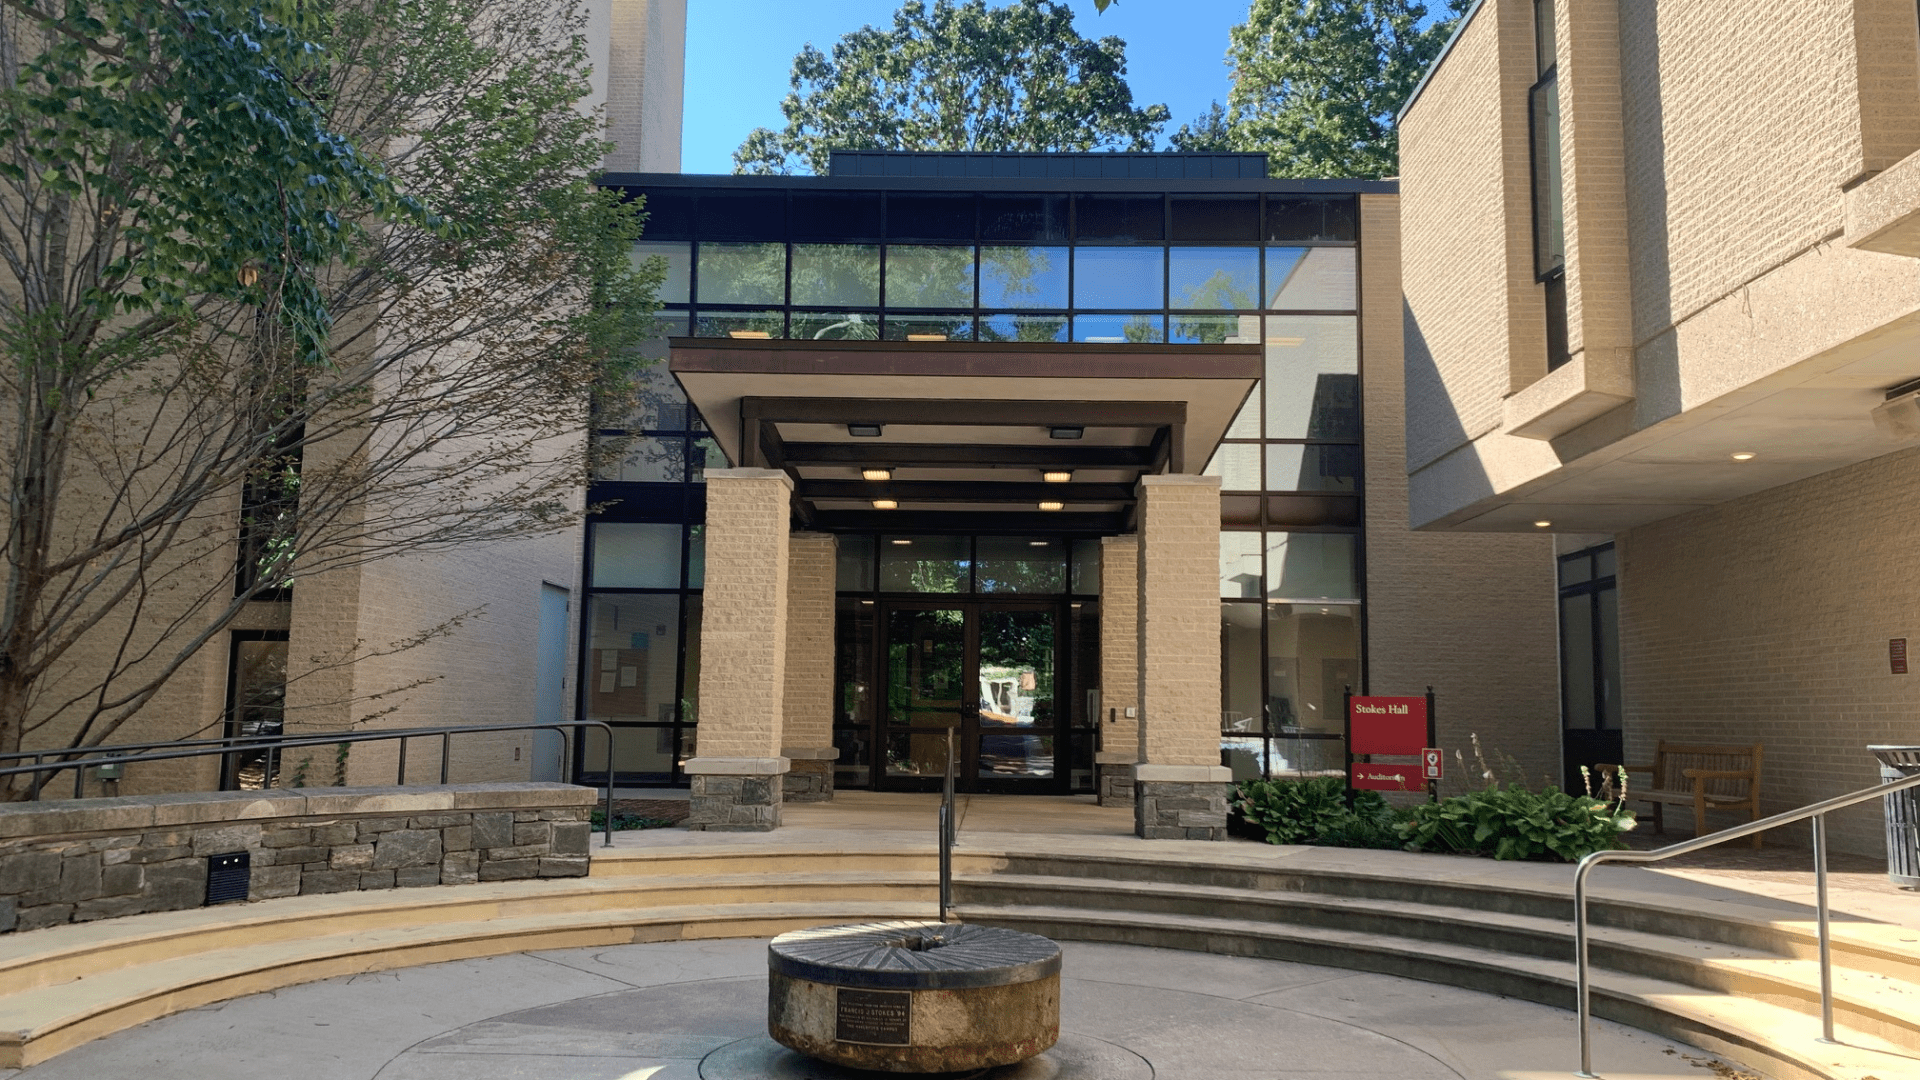 A picture of Stokes Hall.